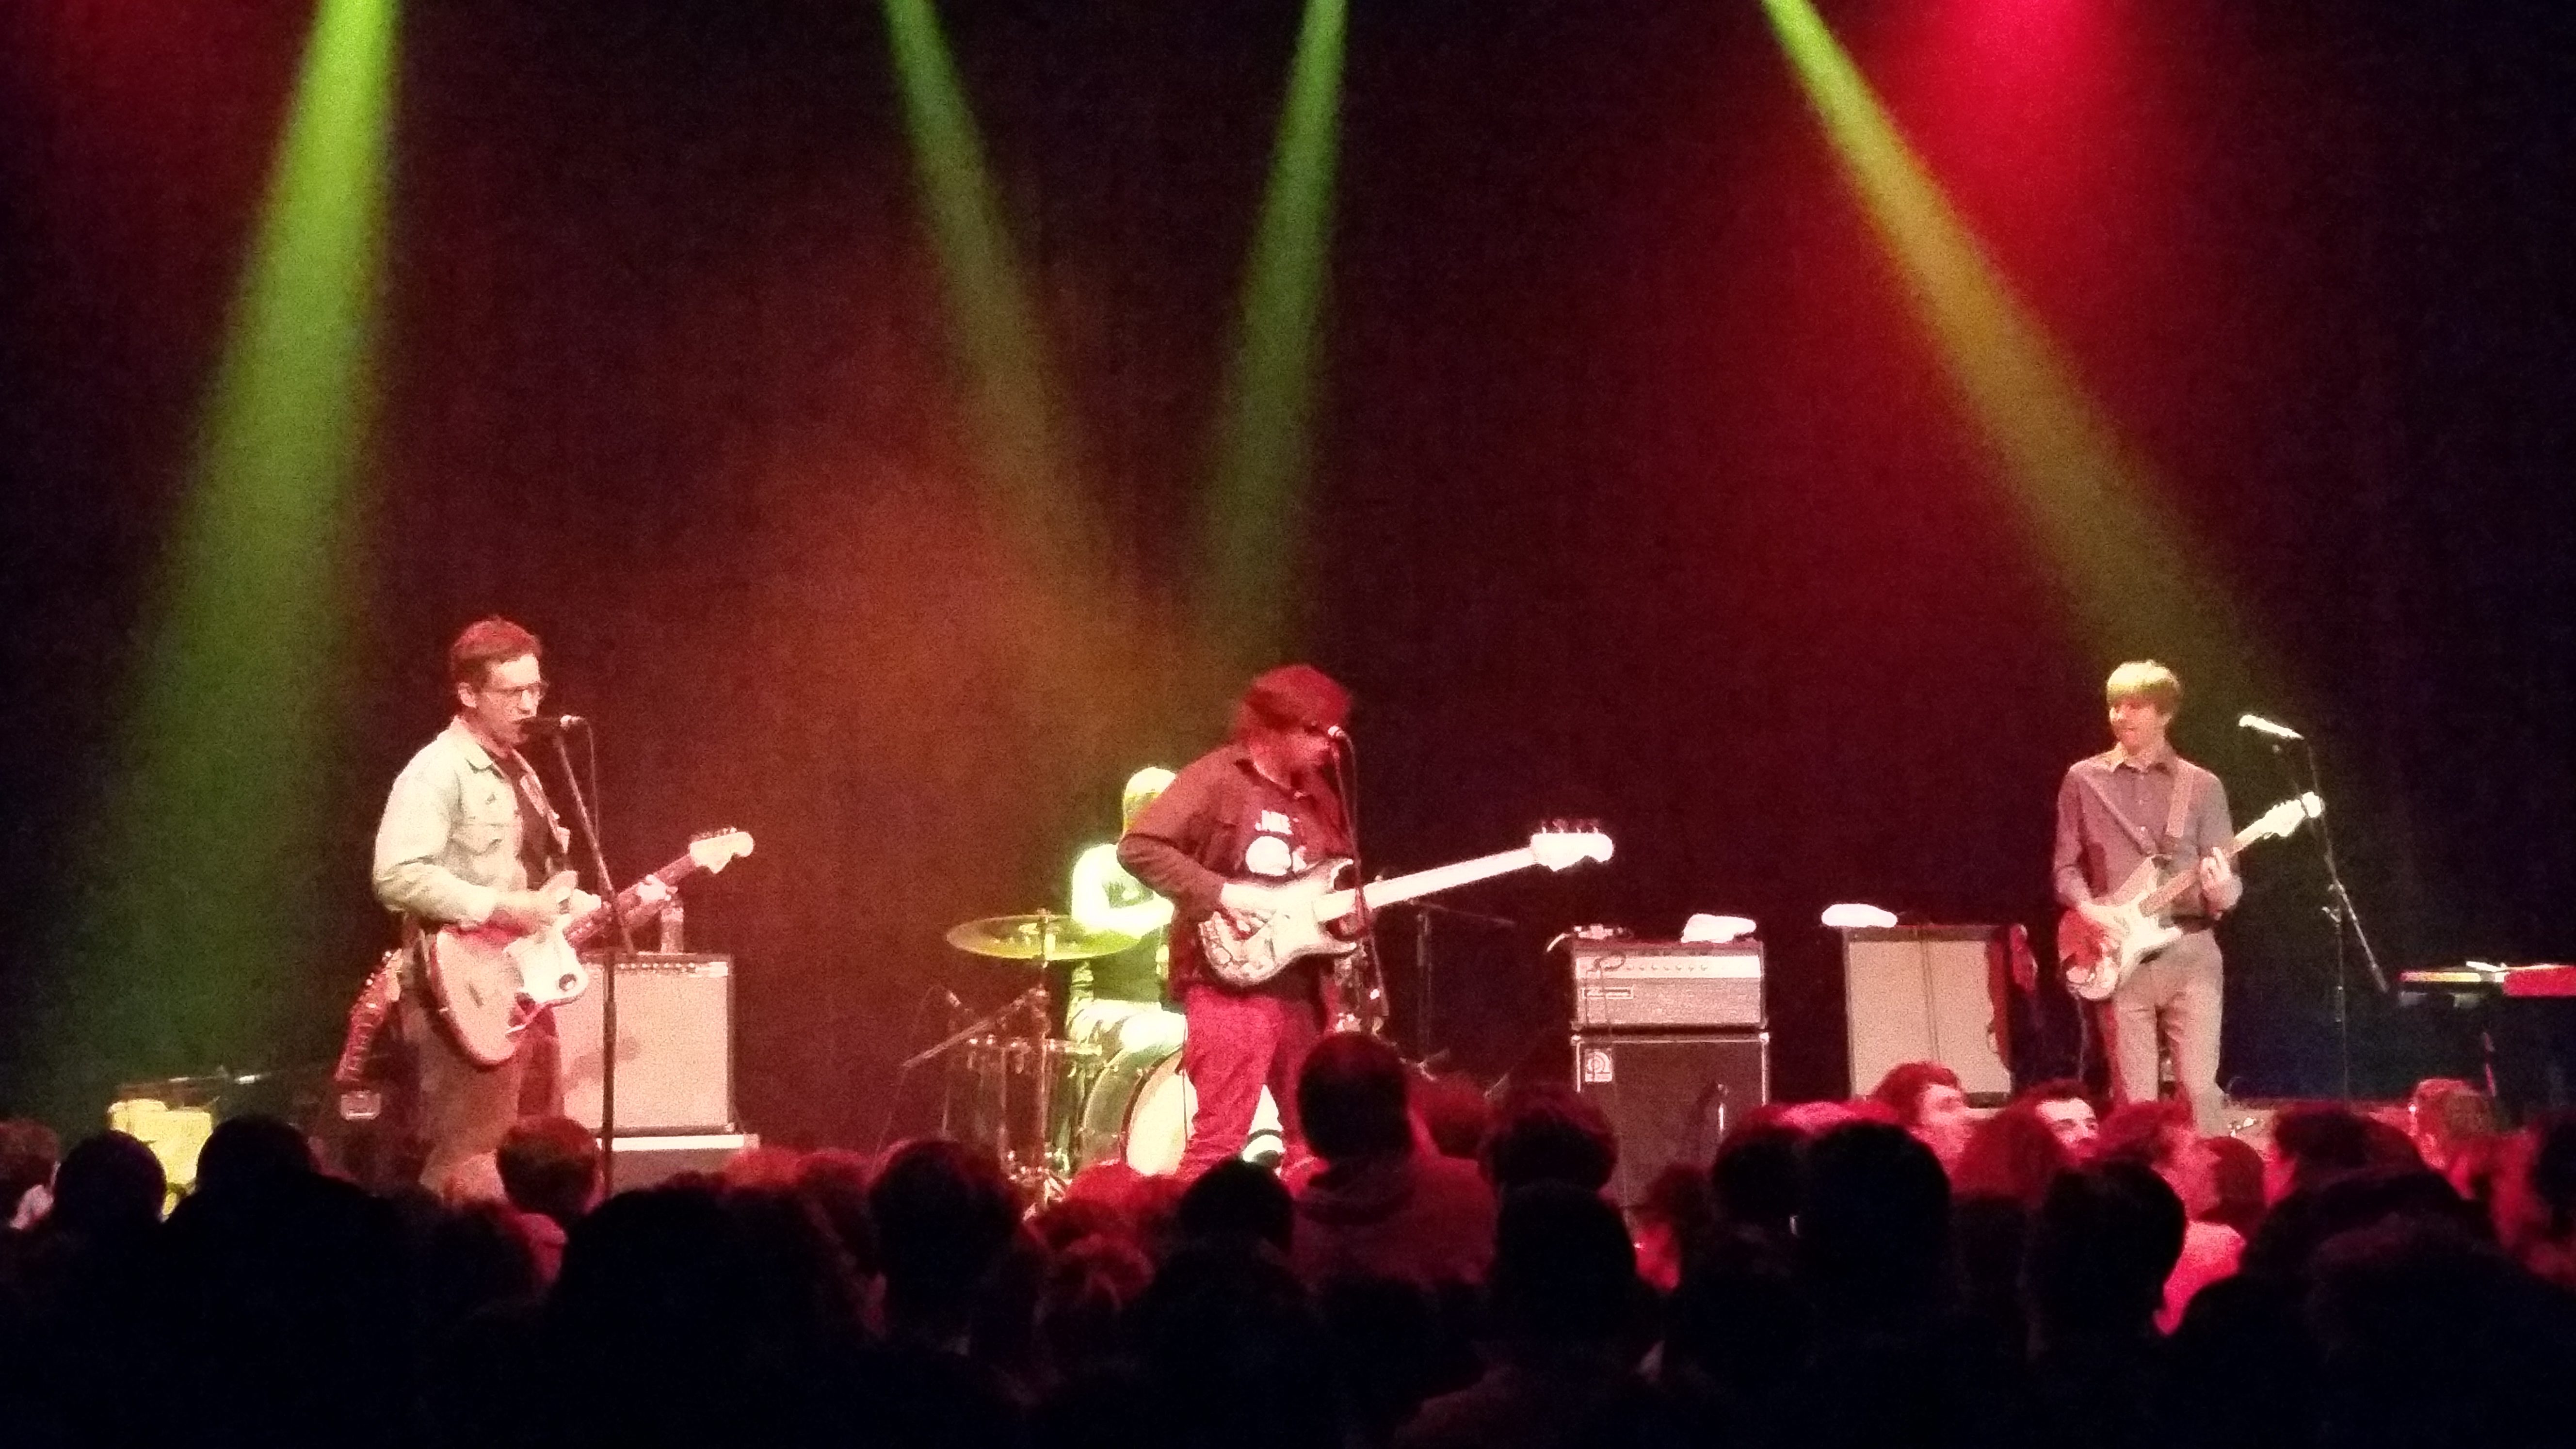 Review of Parquet Courts, Thurston Moore, and Heron Oblivion, live in Vancouver